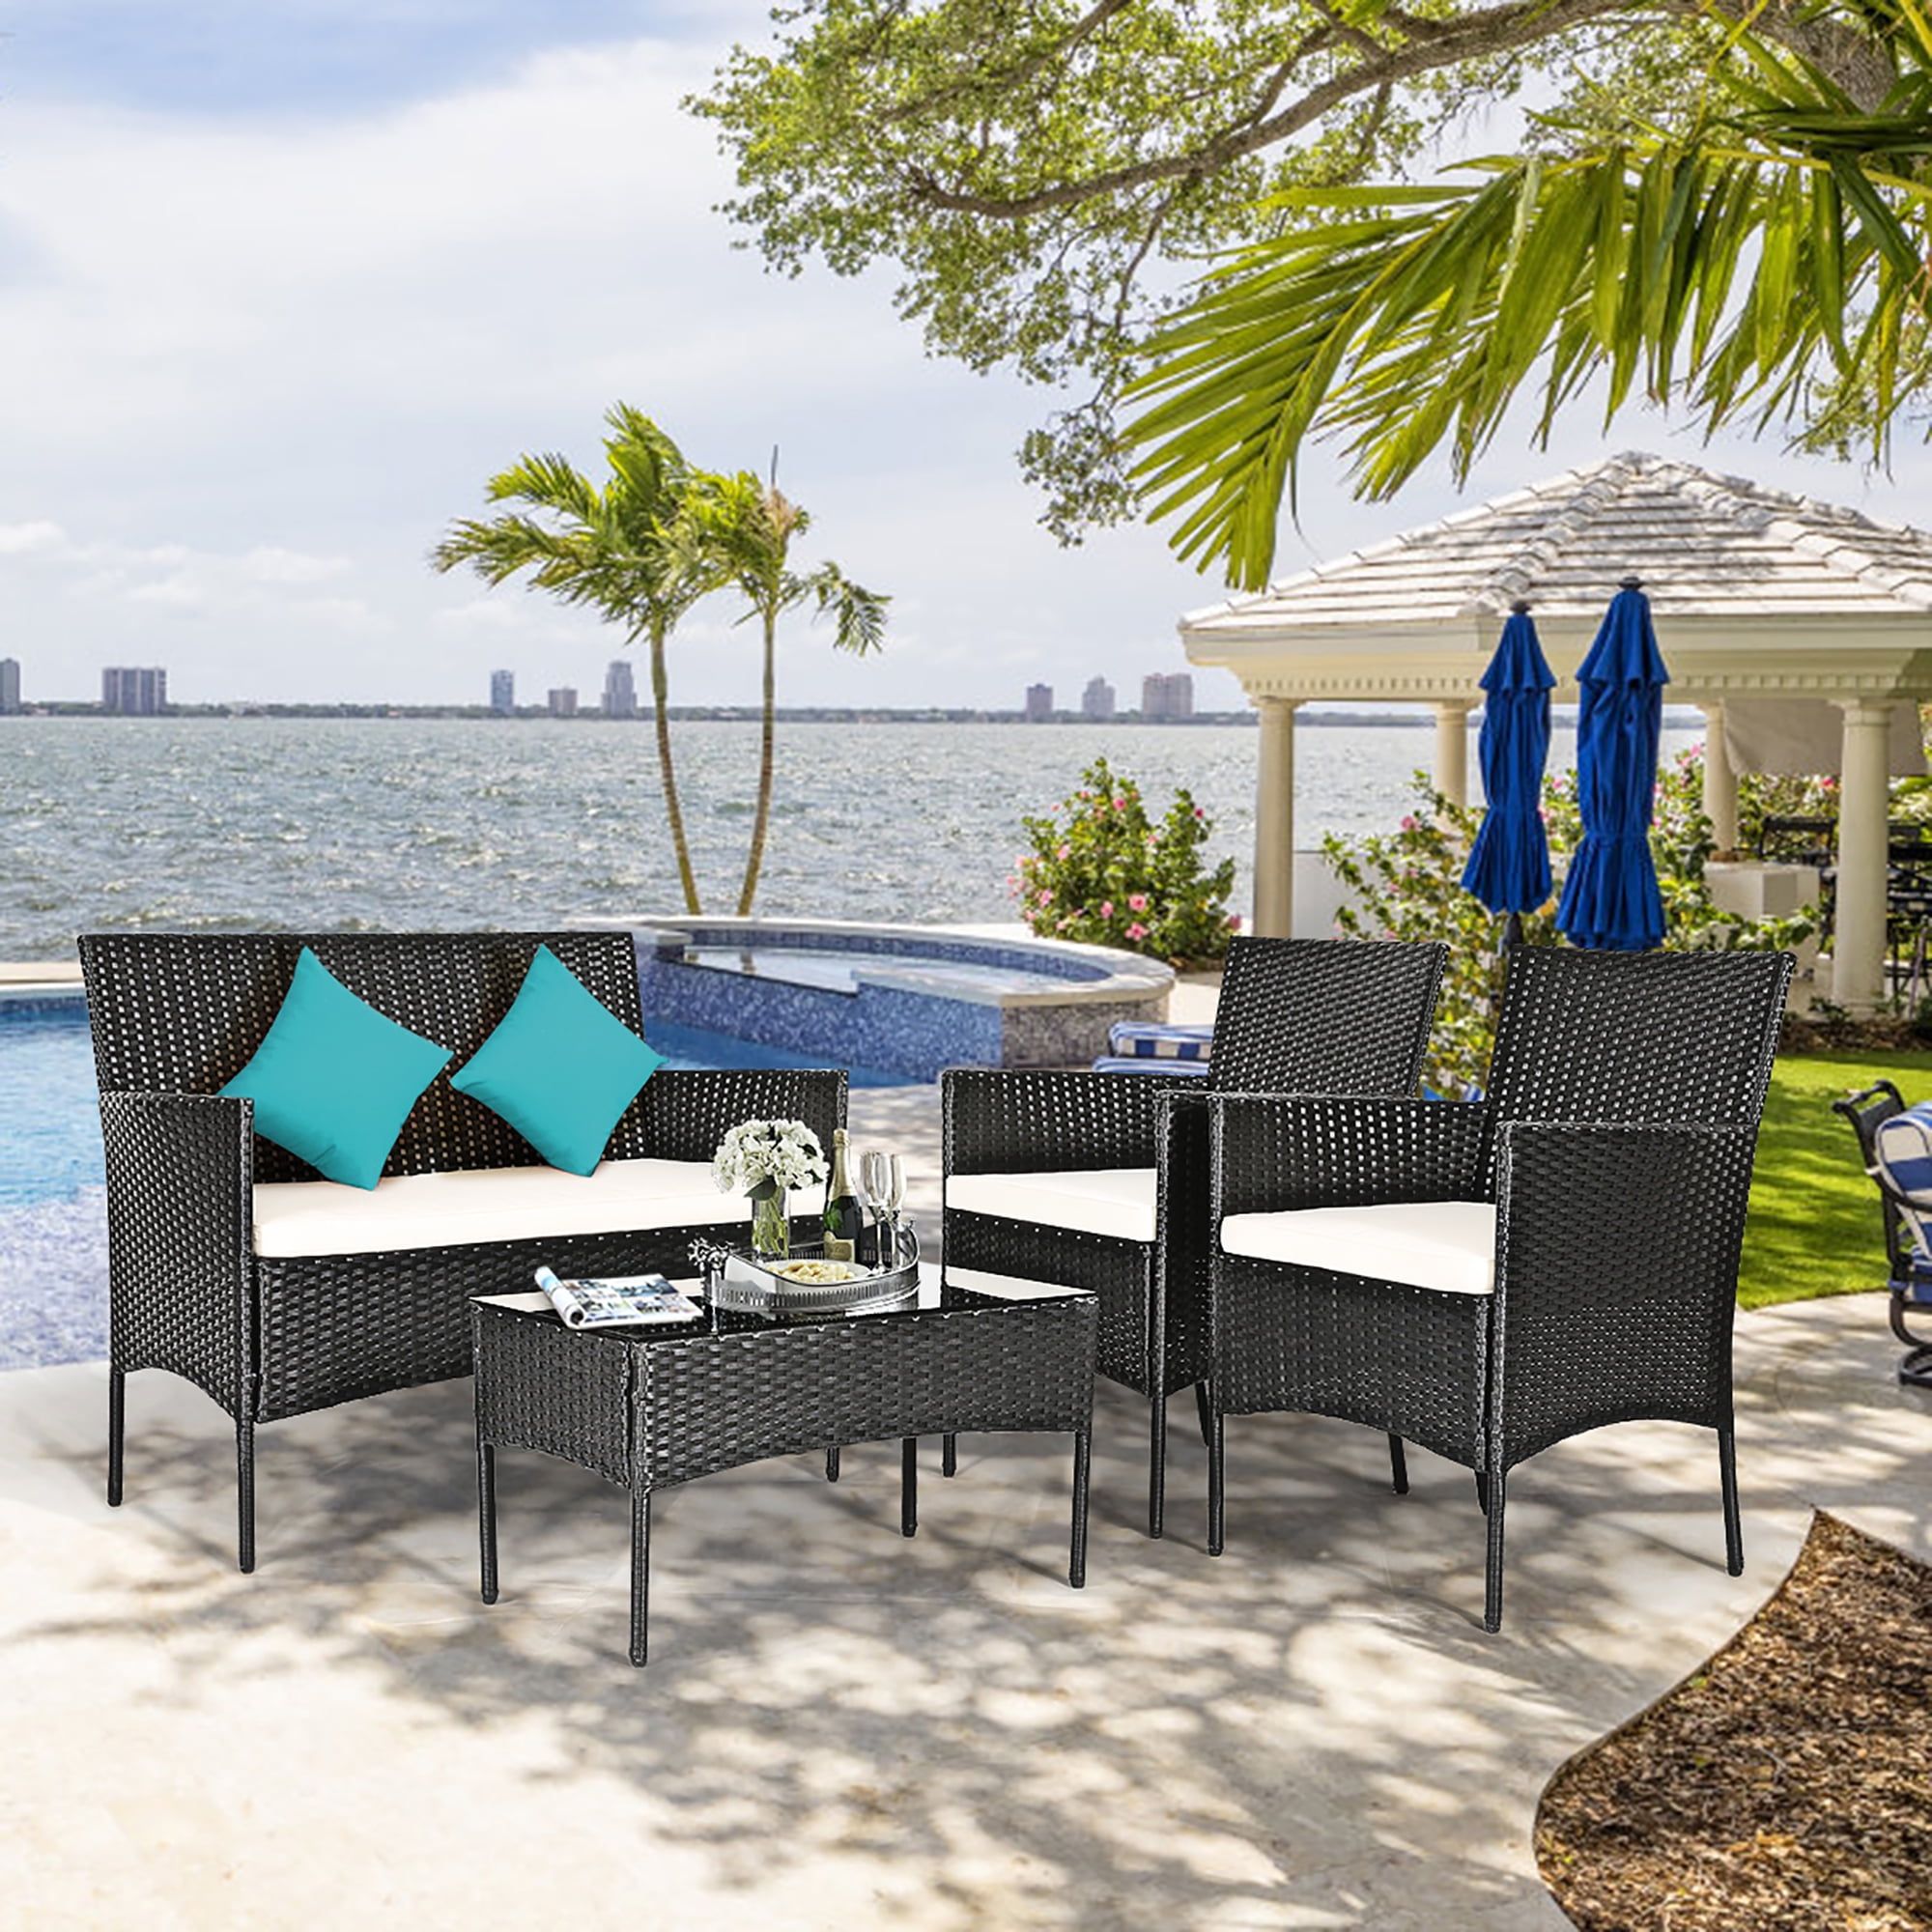 Costway 4pcs Patio Rattan Furniture Set Cushioned Sofa Coffee Table Inside 4pcs Rattan Patio Coffee Tables (View 4 of 15)